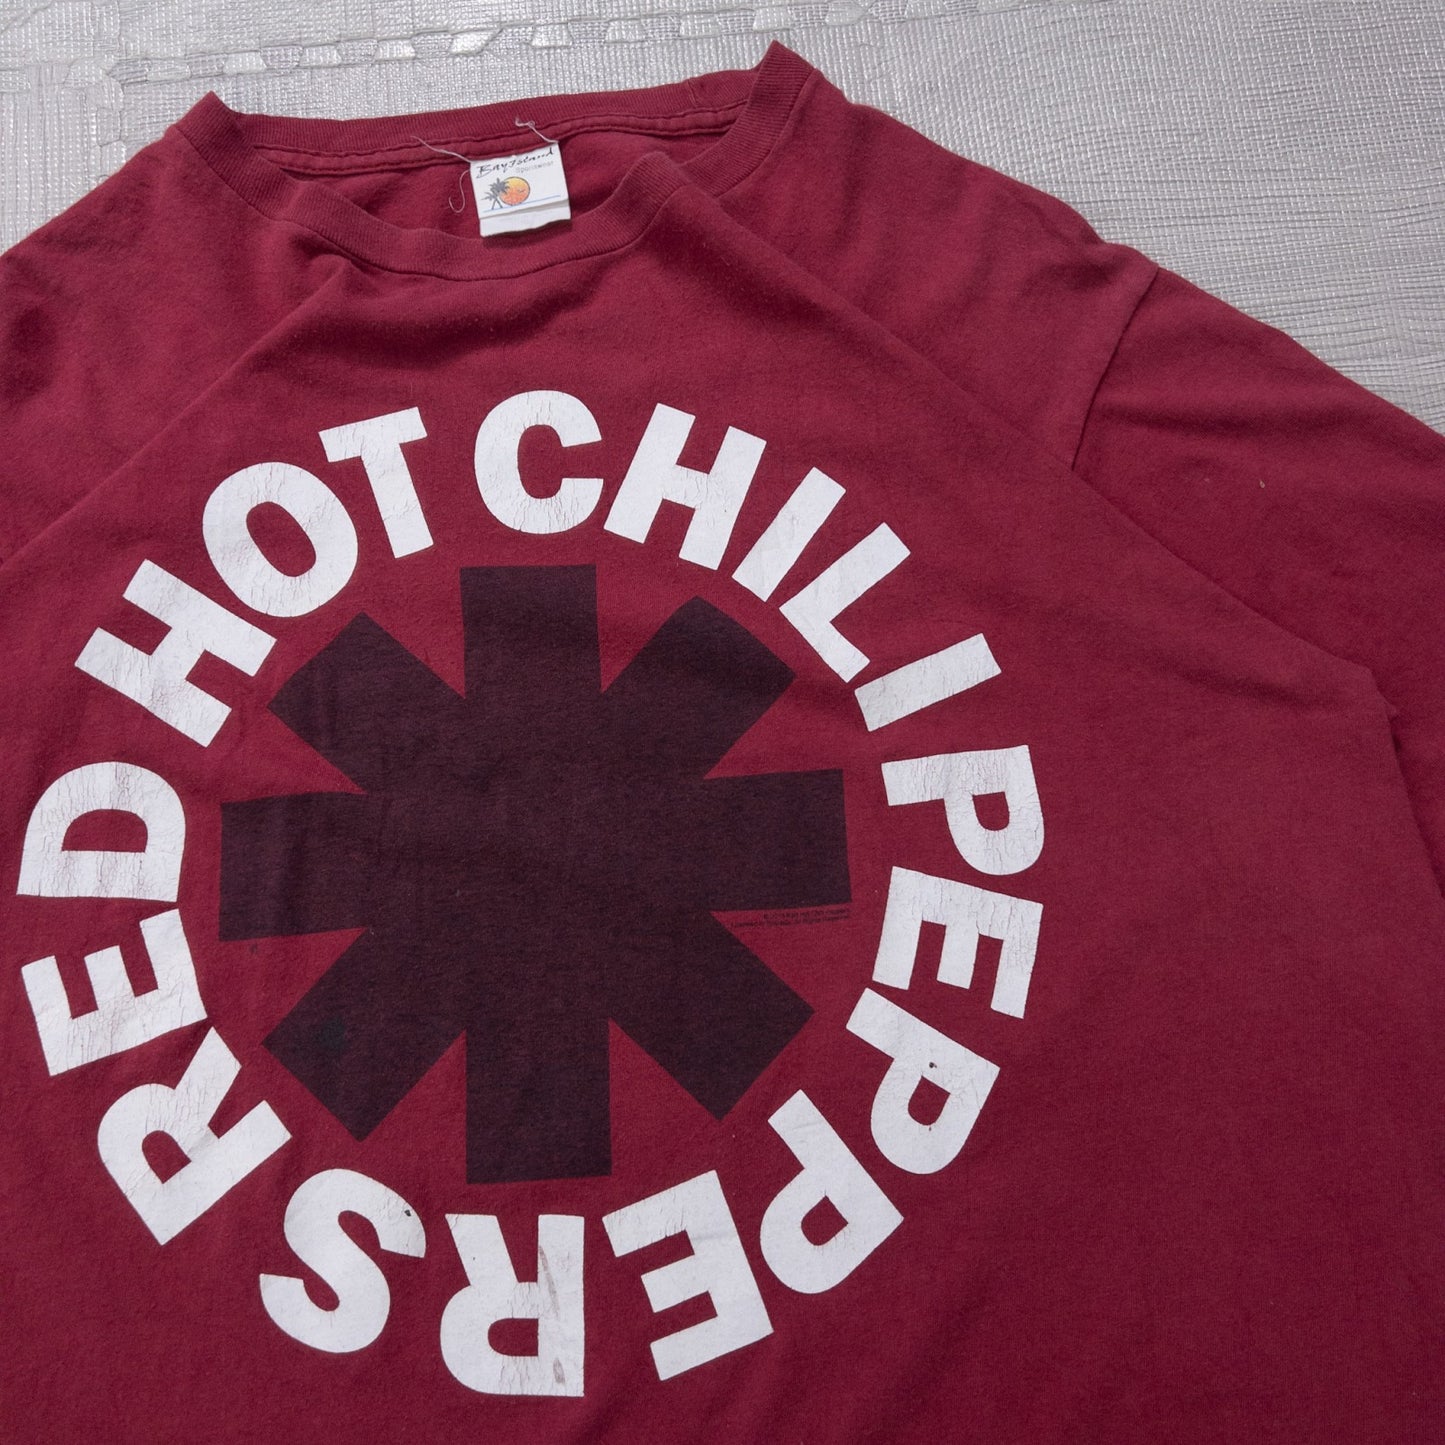 10s ”RED HOT CHILI PEPPERS” XL